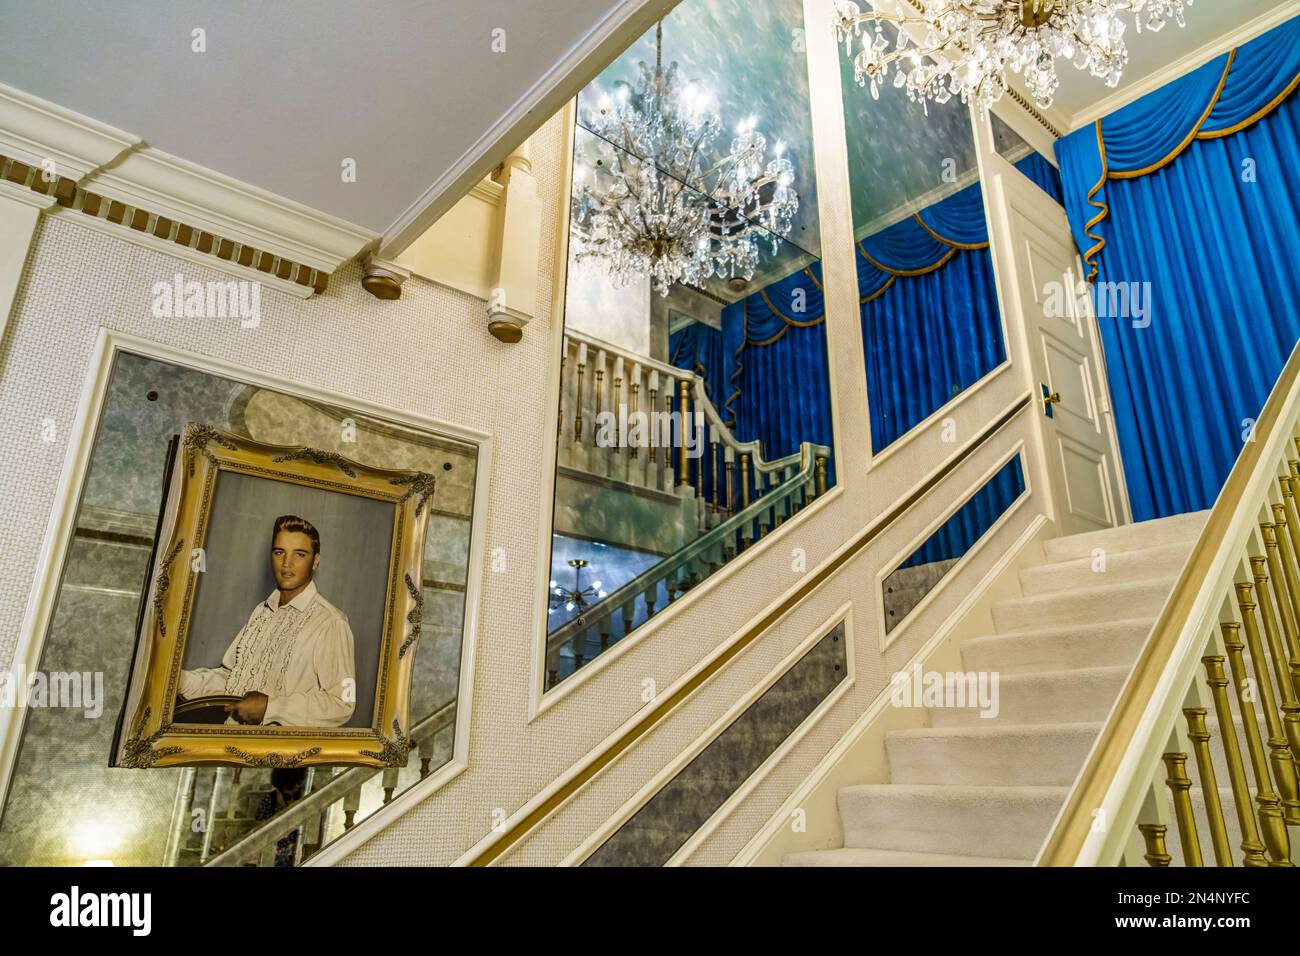 The main staircase with oil portrait of Elvis in Graceland, the home of Elvis Presley in Memphis, Tennessee. Stock Photo